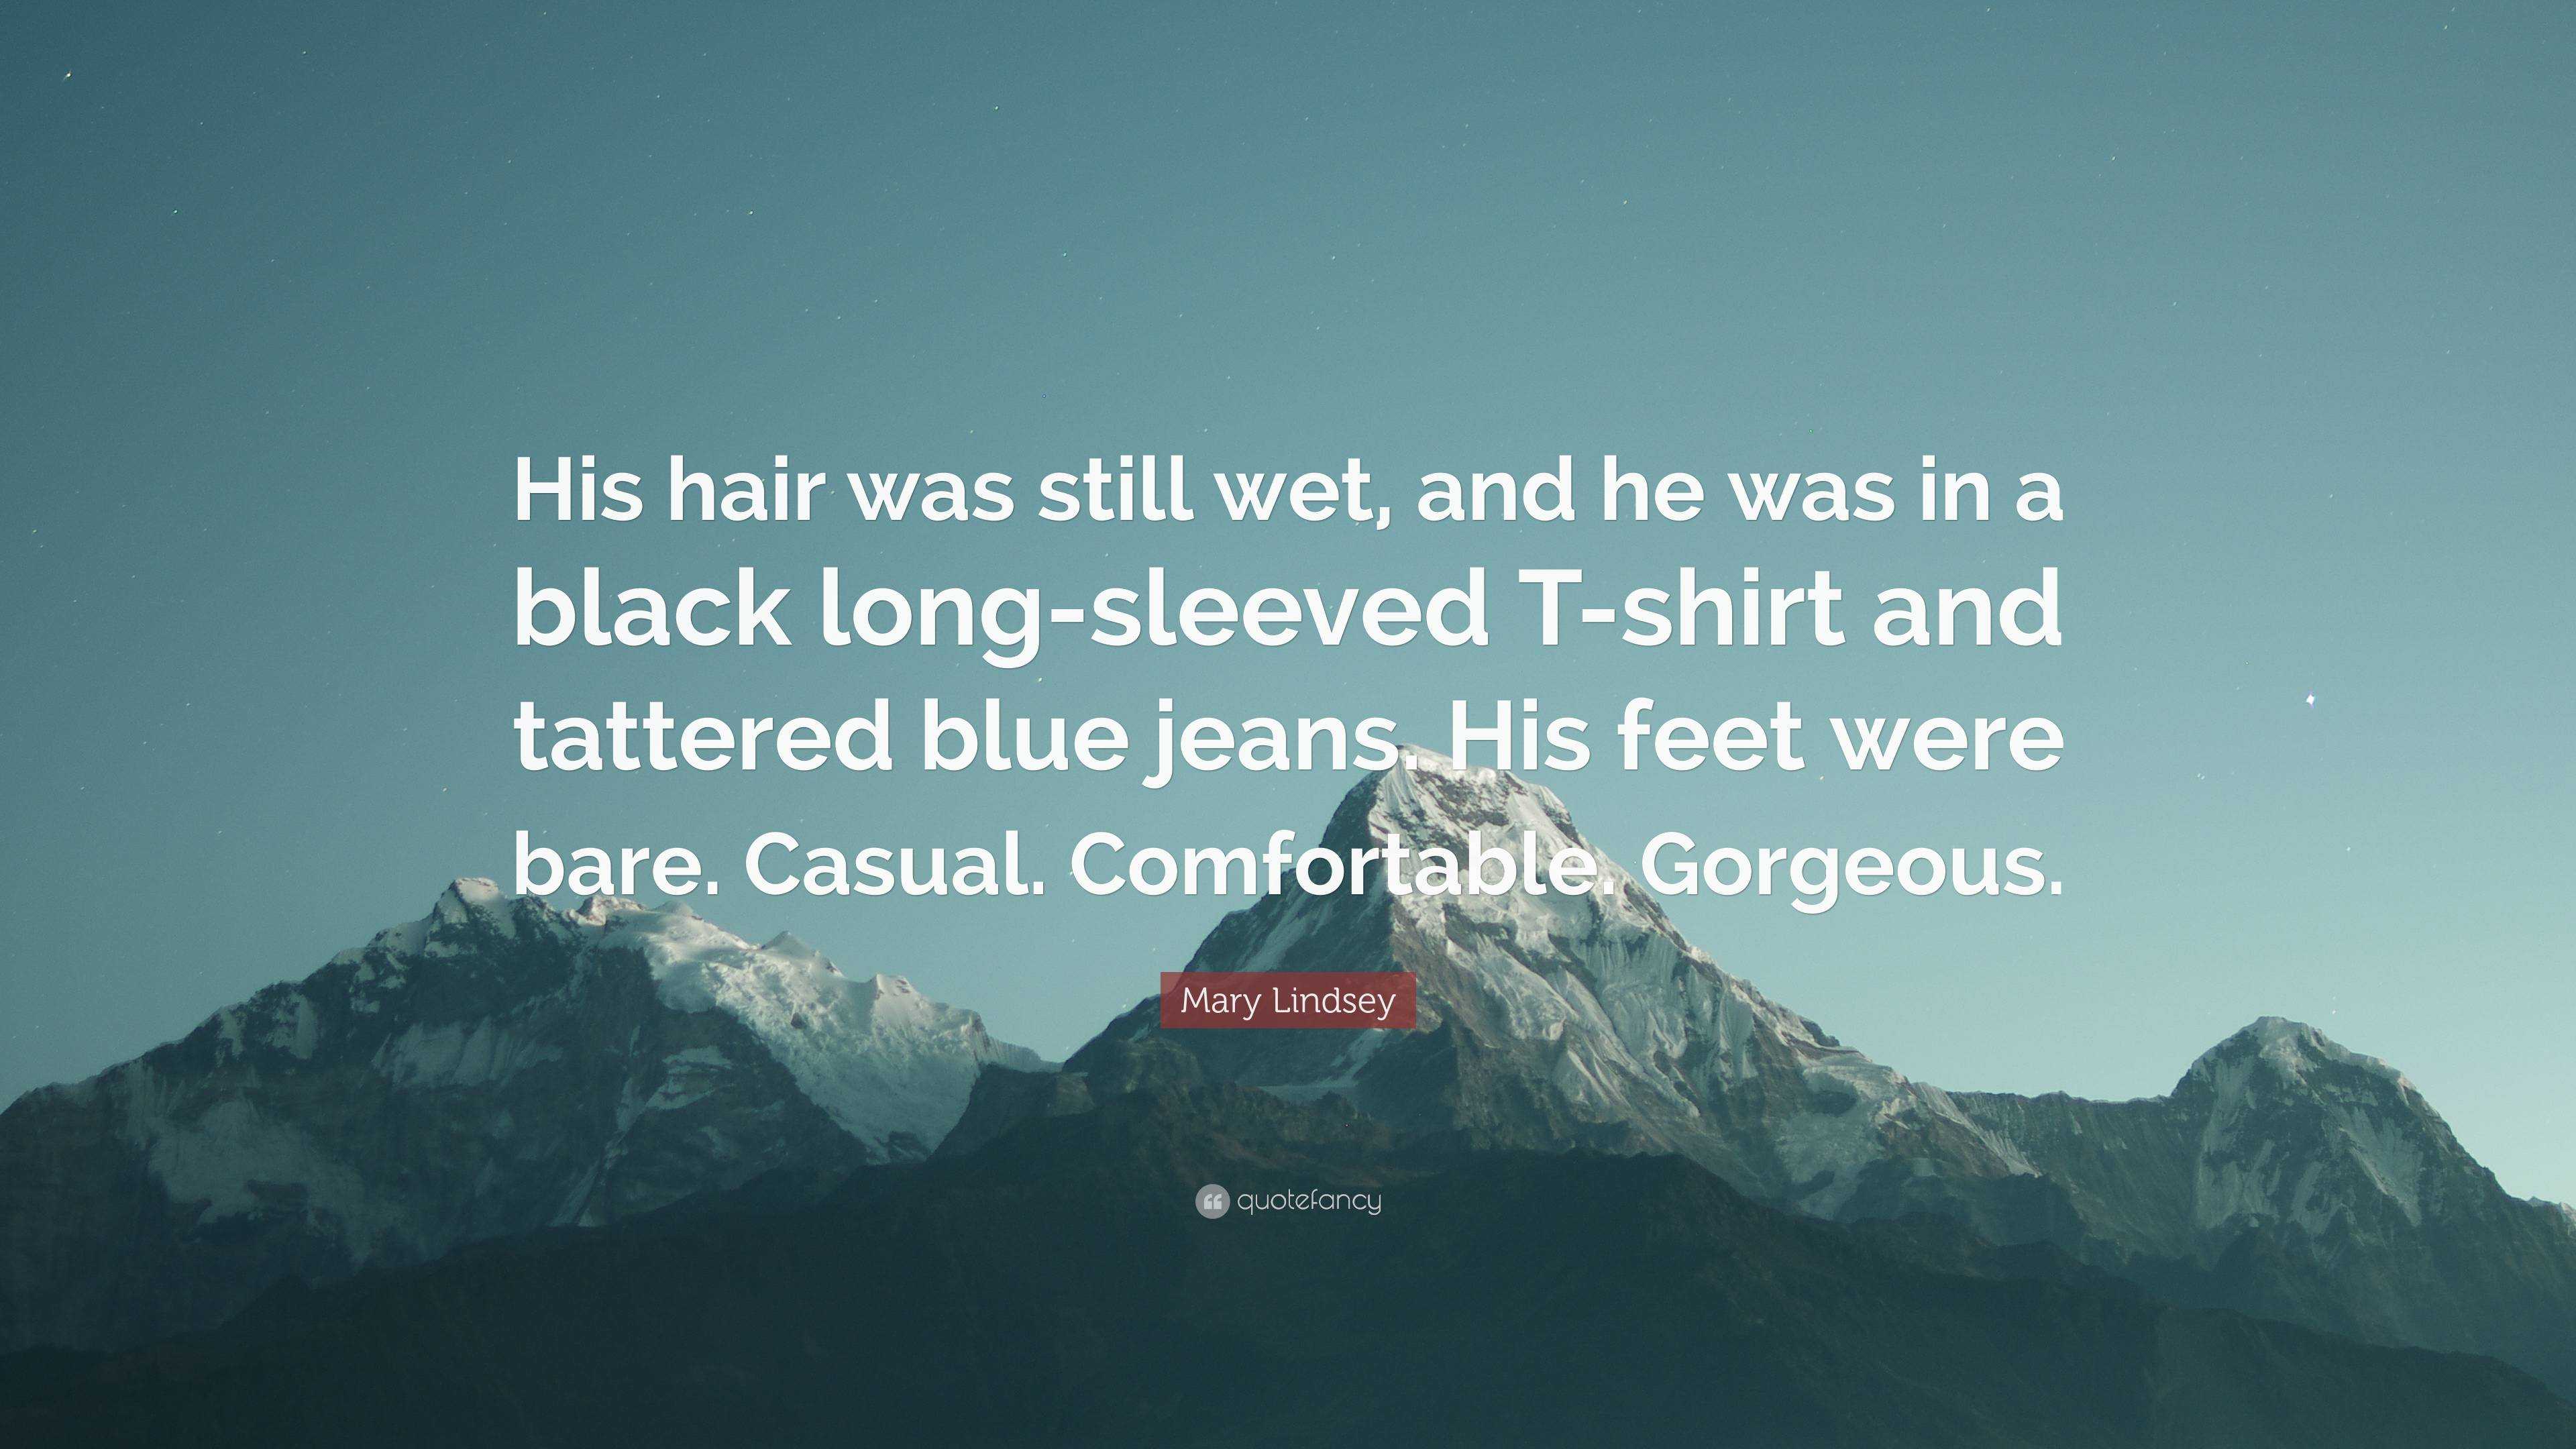 Mary Lindsey Quote: “His hair was still wet, and he was in a black  long-sleeved T-shirt and tattered blue jeans. His feet were bare. Casual.  ...”